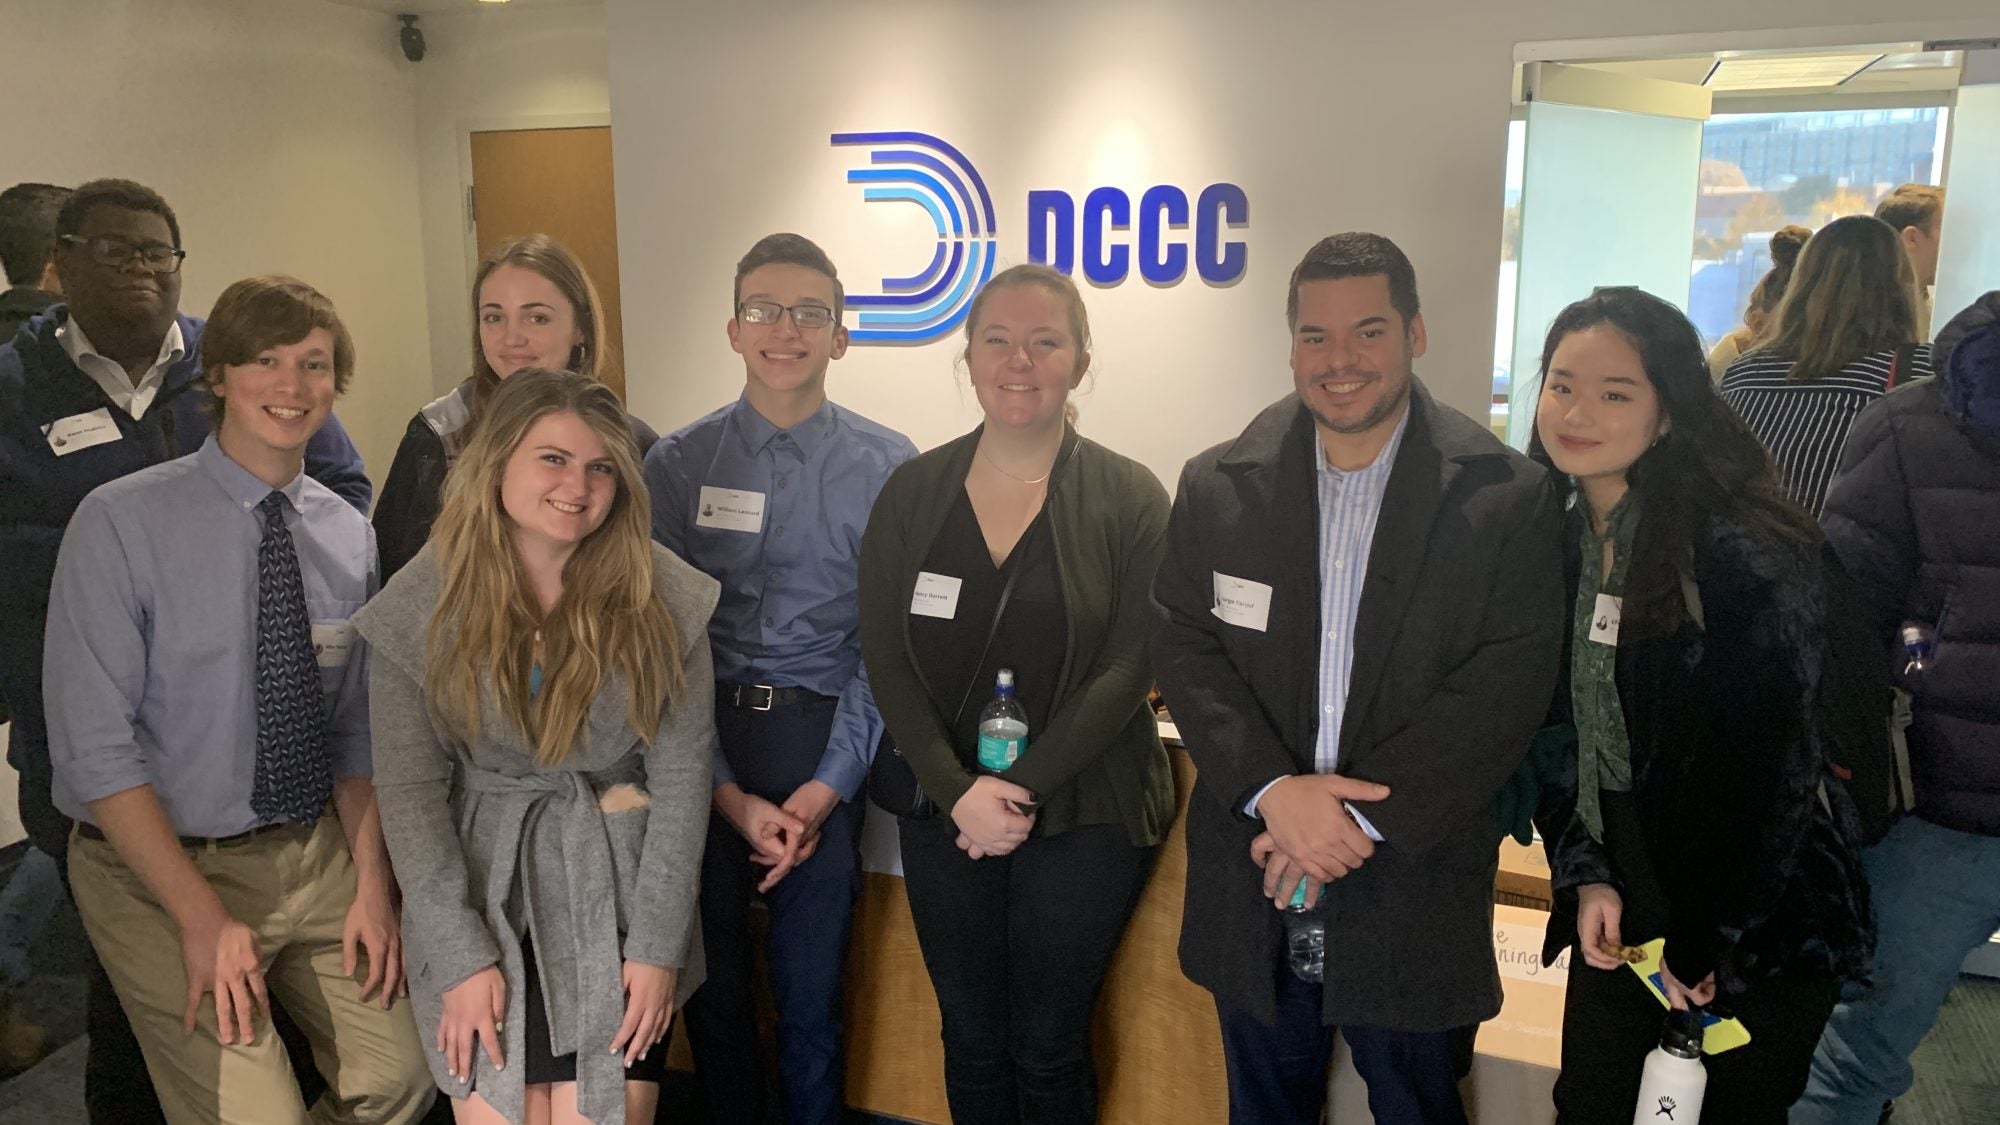 Students stand in NCCC office in front of NCCC logo.